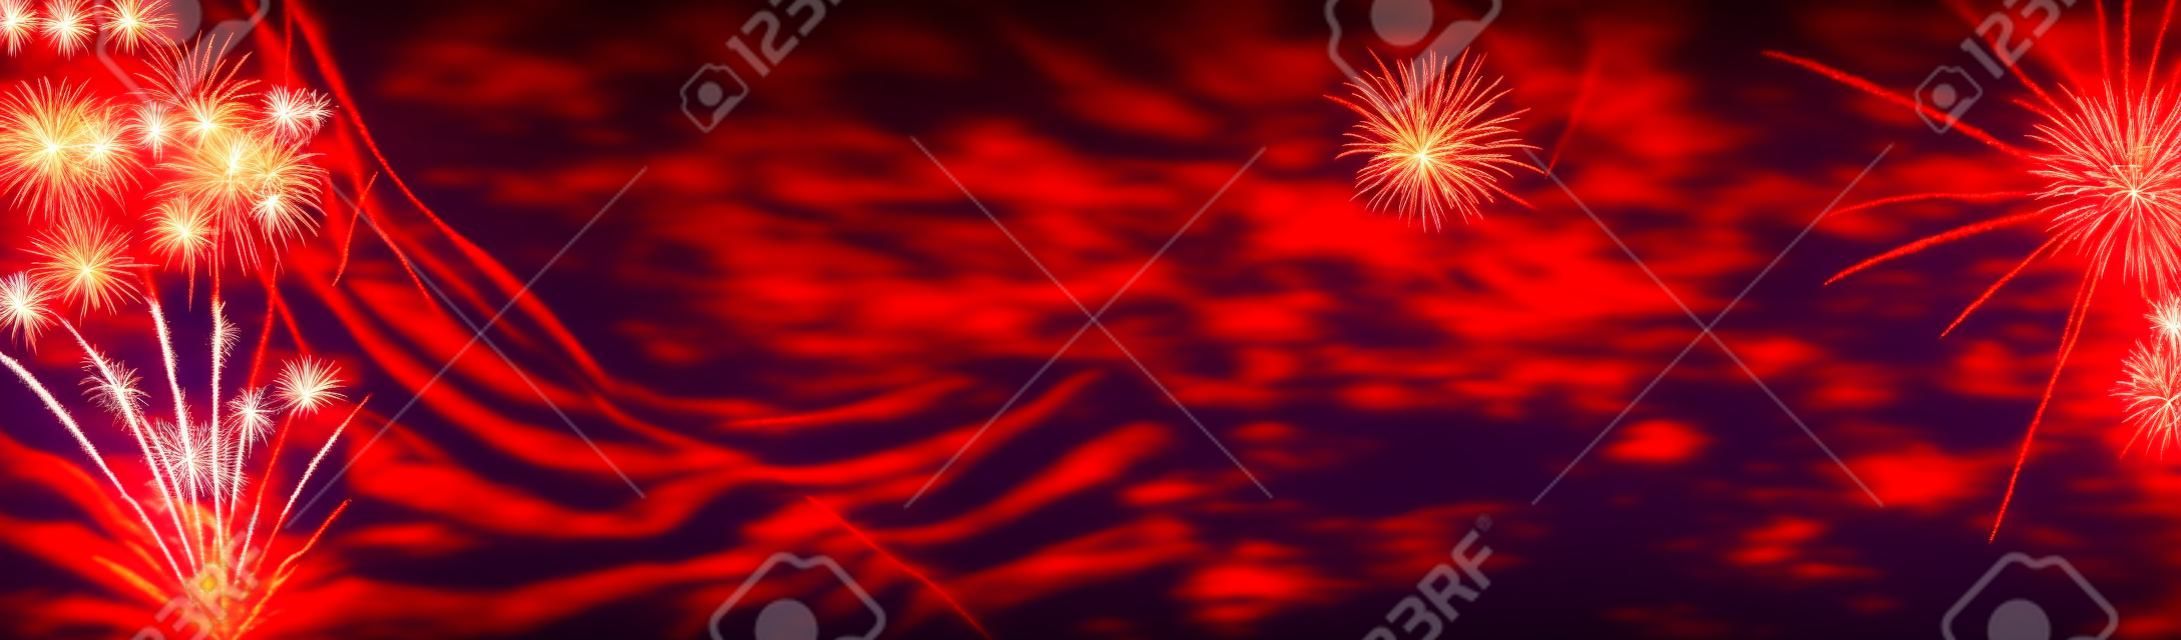 American Flags At Sunset With Fireworks - Abstract Defocused Composition